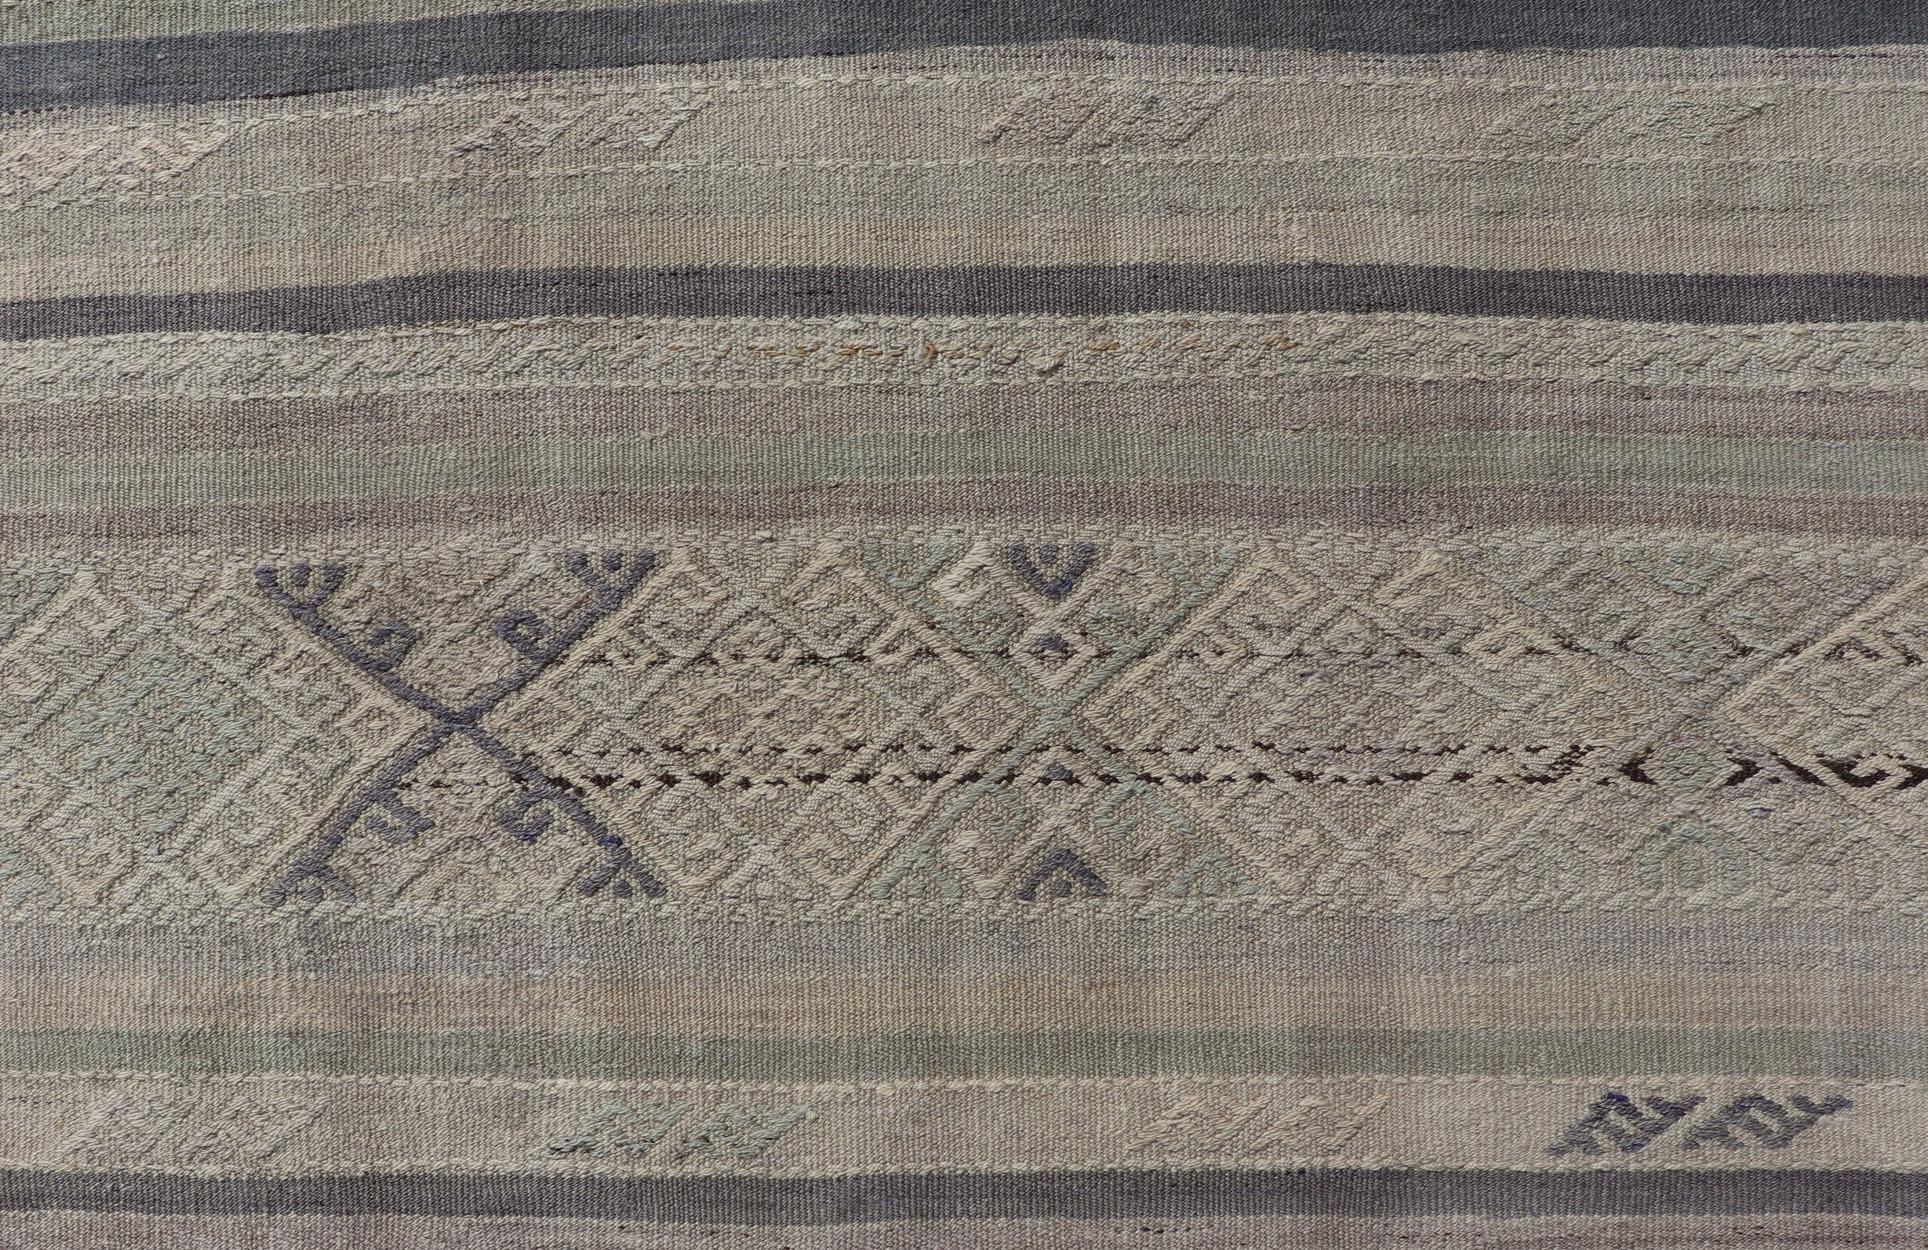 Square size vintage Turkish Kilim in dark blue, L. green, gray, Taupe . Keivan Woven Arts / rug EN-P13449, country of origin / type: Turkey / Kilim, circa Mid-20th Century.

Measures: 5'10 x 6'1

This flat-woven Kilim from Turkey features an